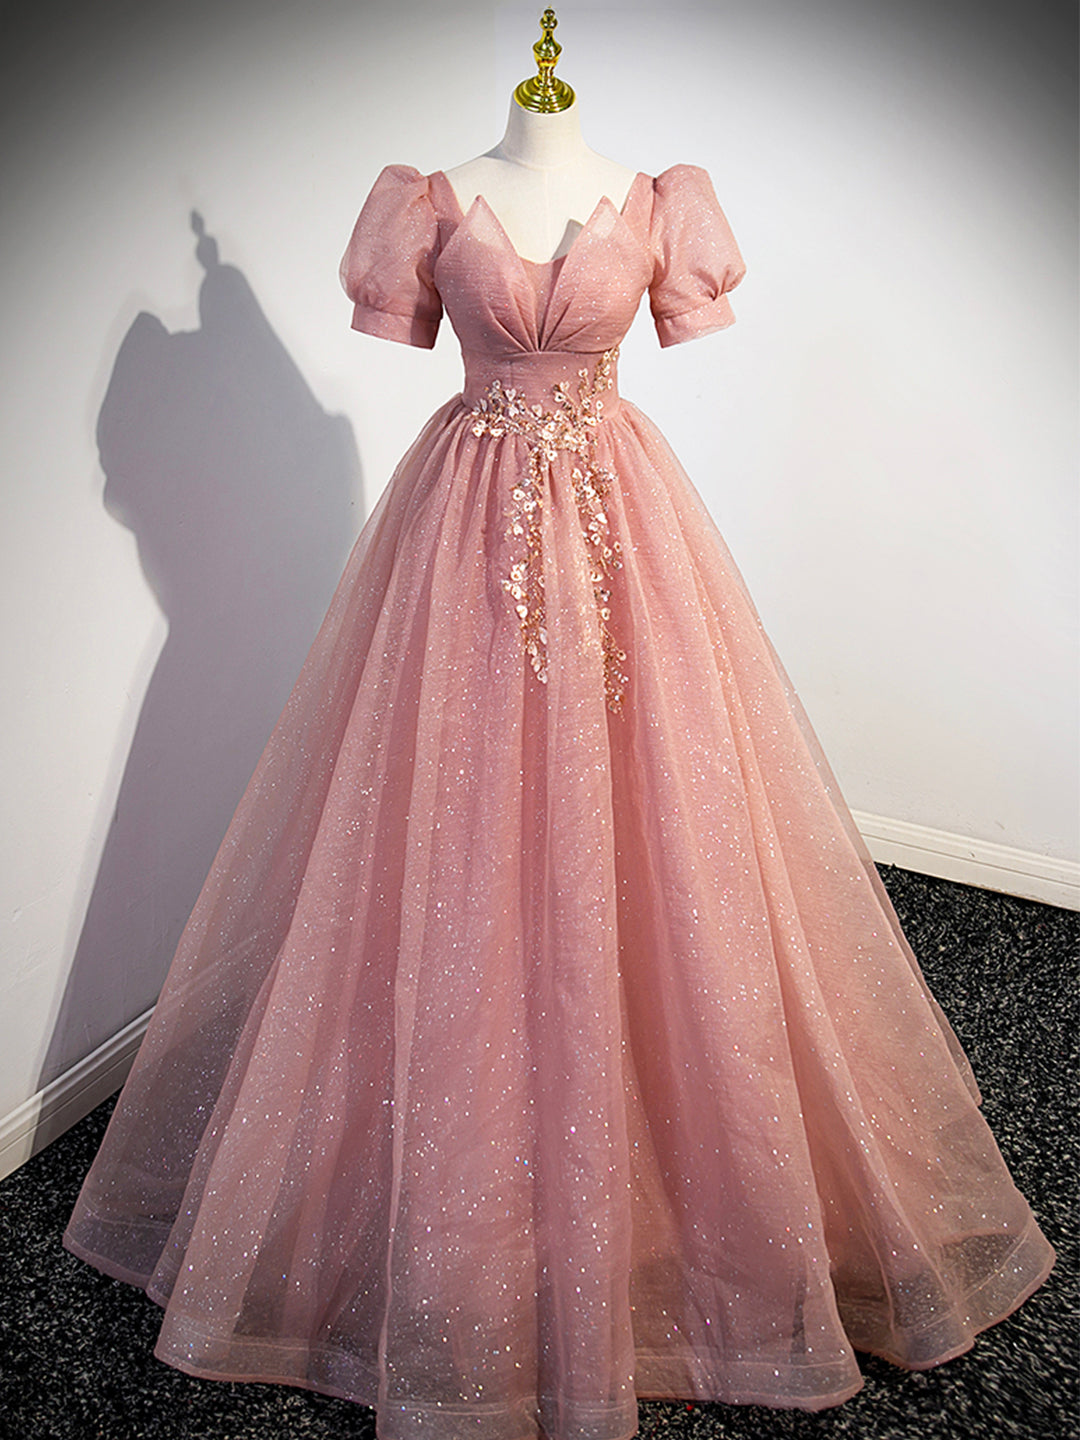 Pink Tulle Floor Length Prom Dress with Short Sleeve, Beautiful A-Line Evening Dress